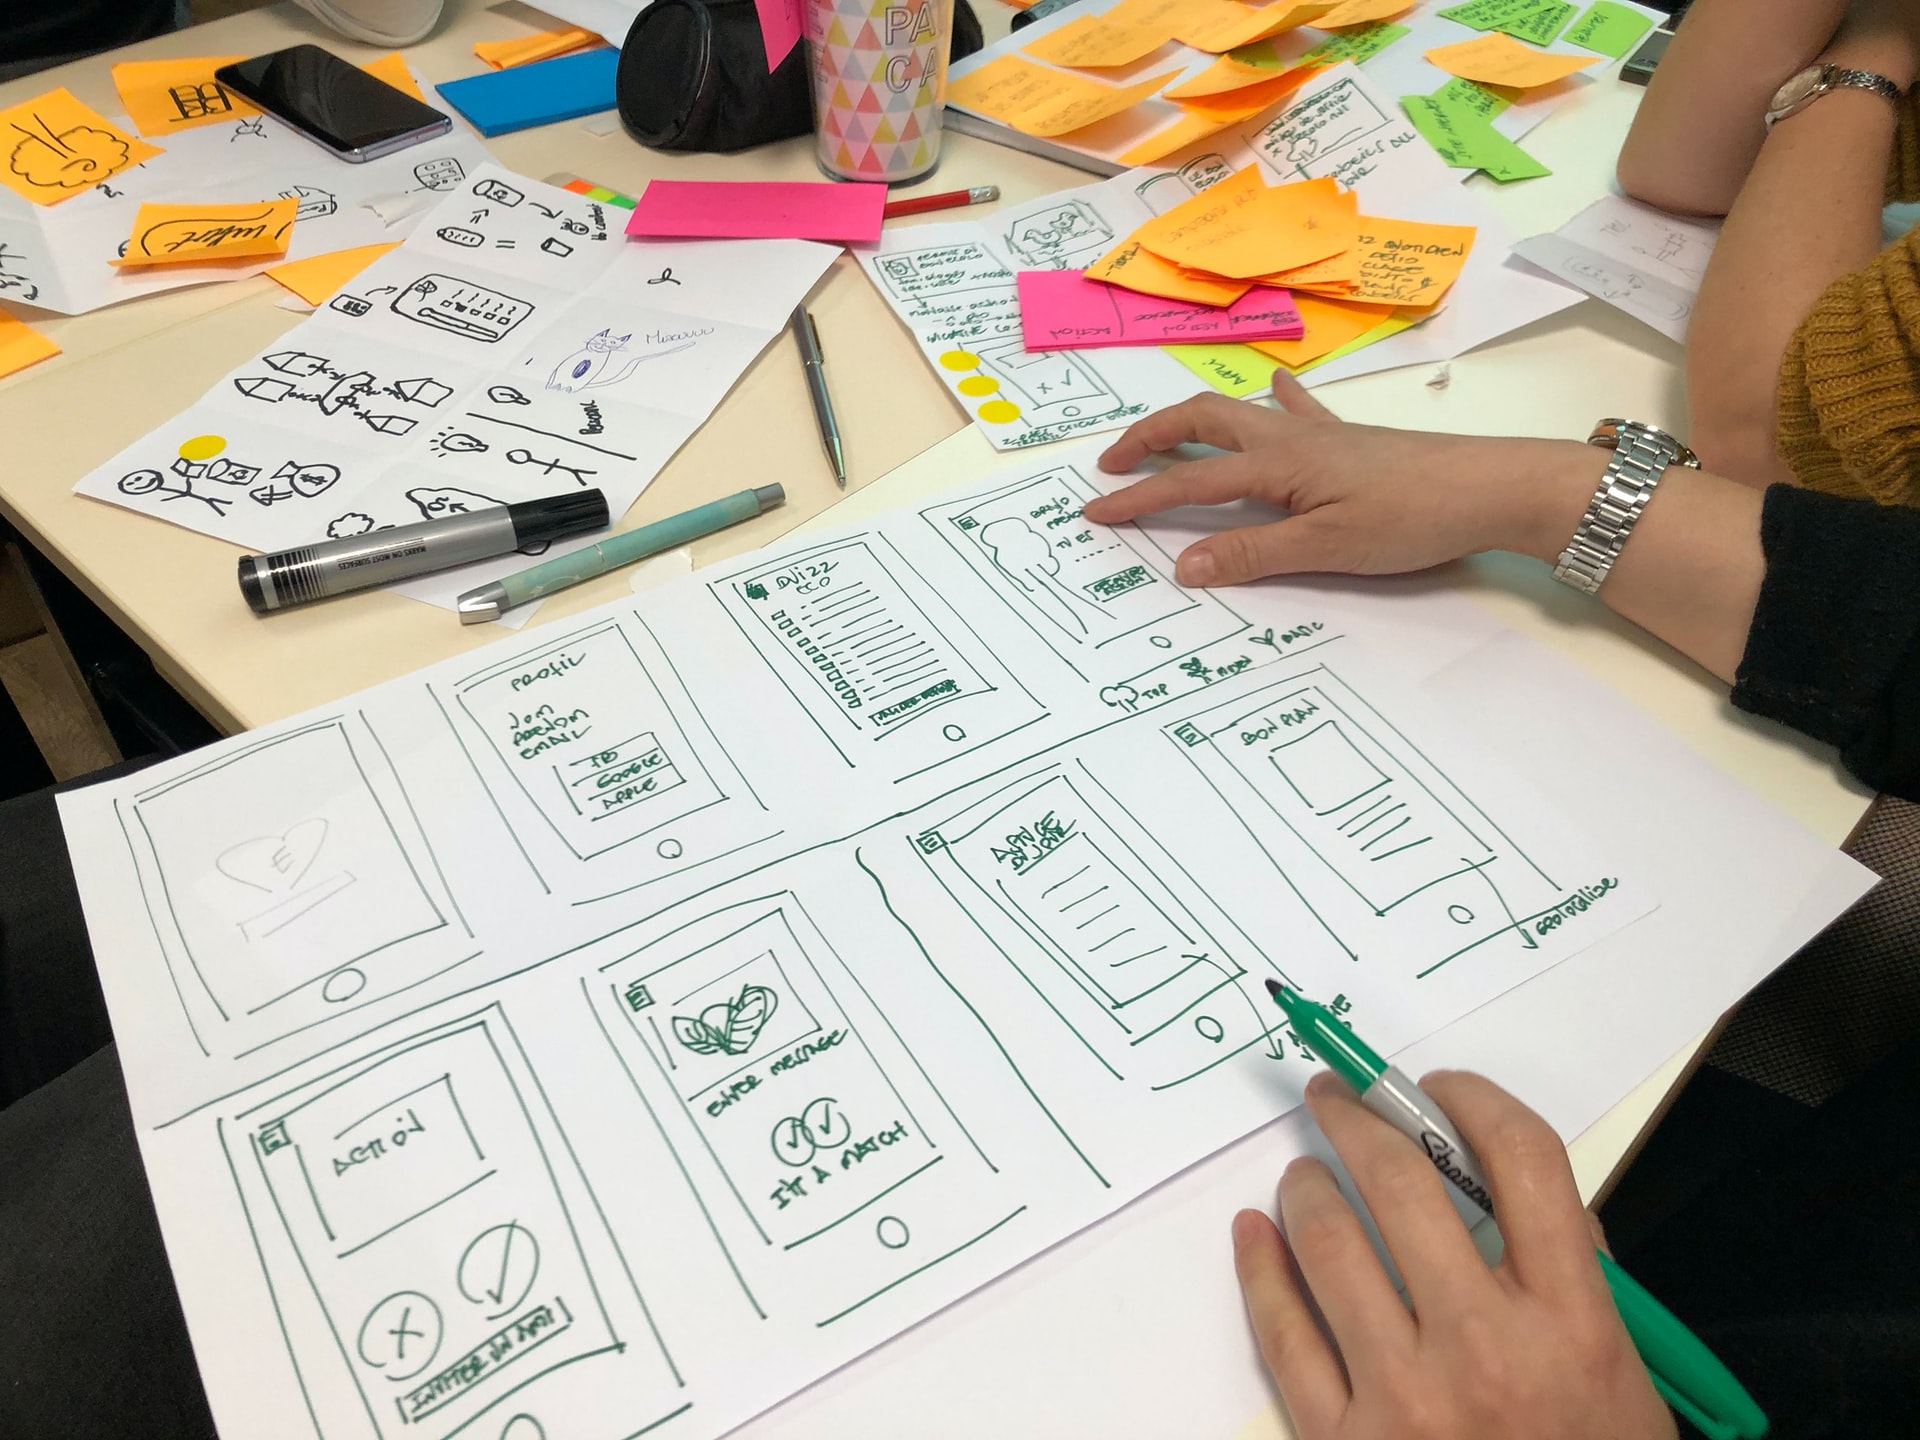 Challenge, Ideas, and Action: A Design Thinking Framework in Action